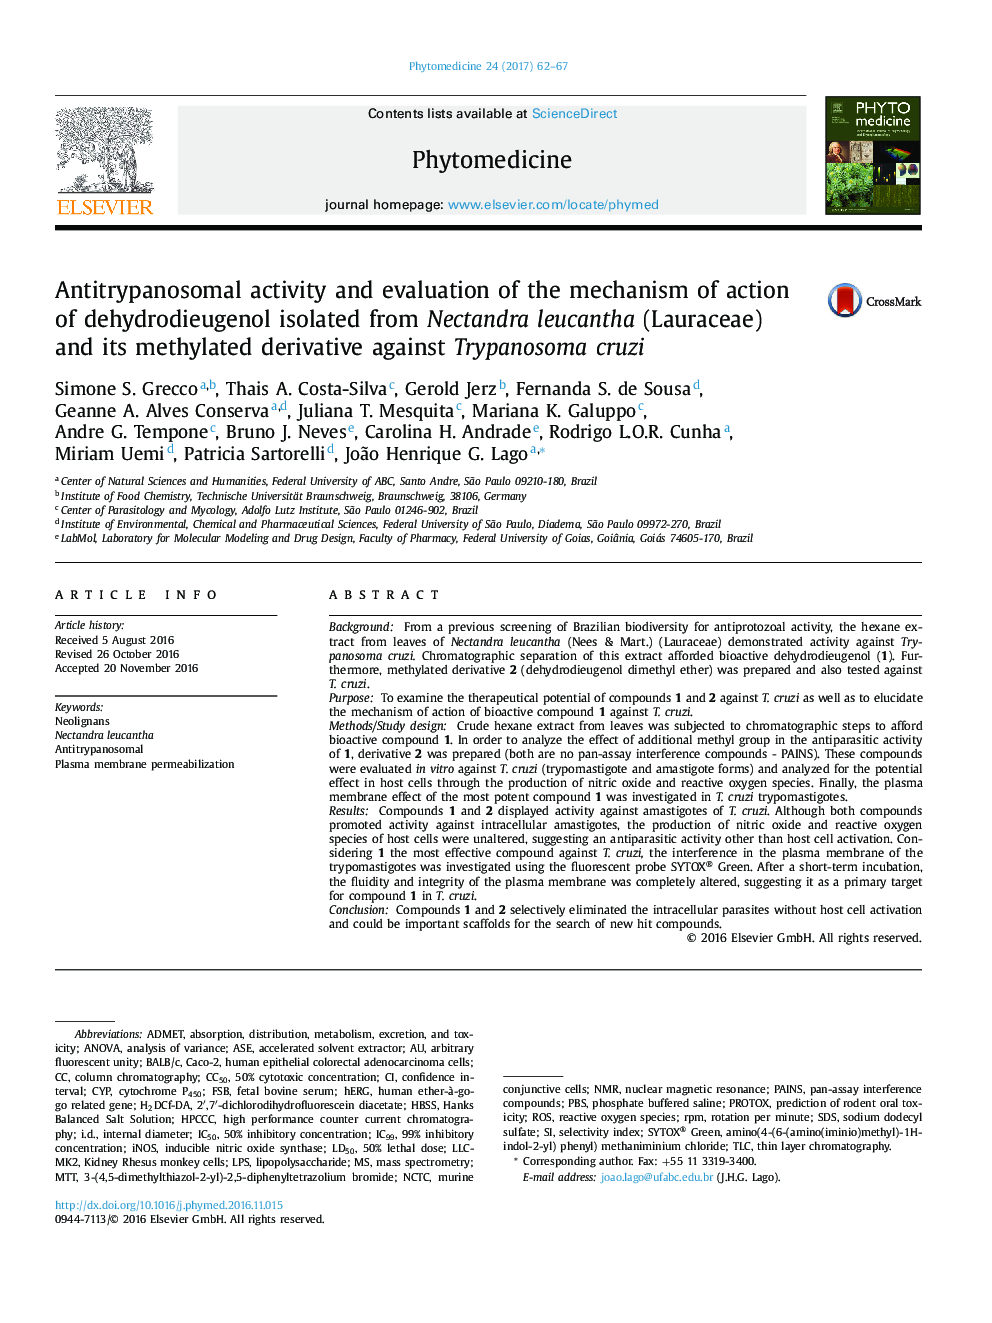 Antitrypanosomal activity and evaluation of the mechanism of action of dehydrodieugenol isolated from Nectandra leucantha (Lauraceae) and its methylated derivative against Trypanosoma cruzi